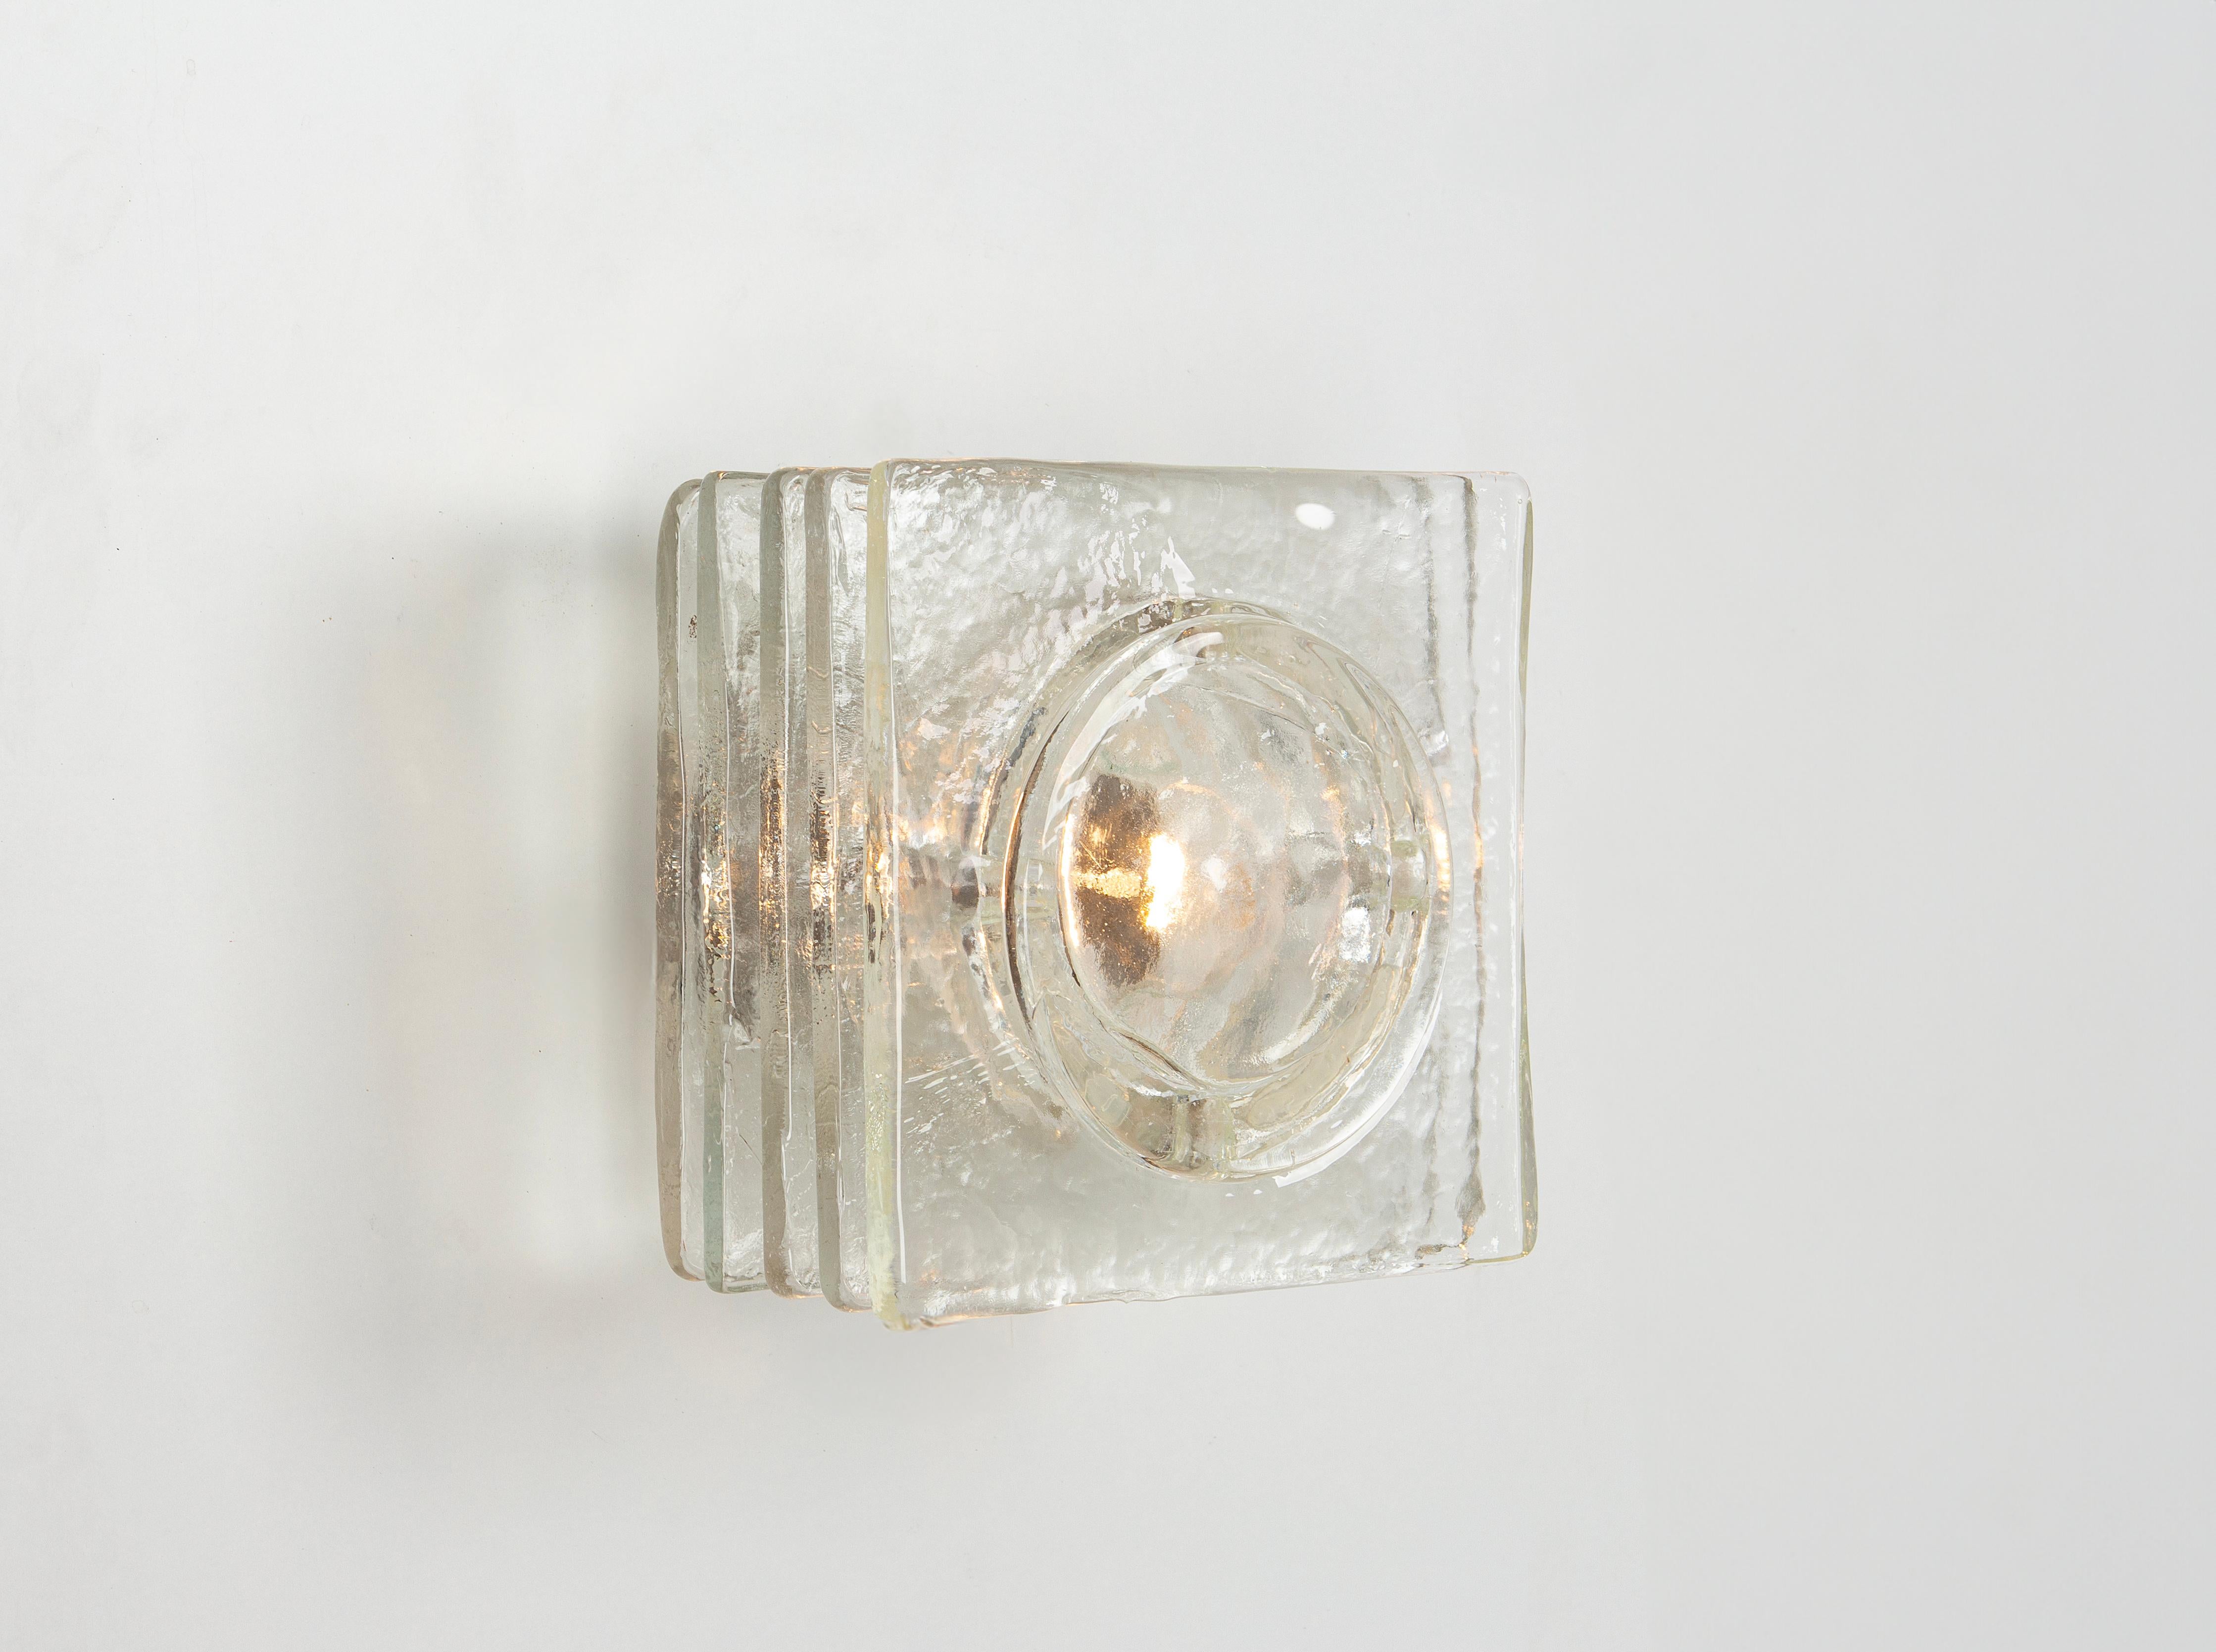 Pair of Cubic Mid-Century Wall Sconce in style of Poliarte, 1970s

It's composed of glass squares stacked together. The glass is clear but textured. Holds one standard socket ( E27) on a metal frame.
Sockets: 1 x E27 standard bulb.
Light bulbs are